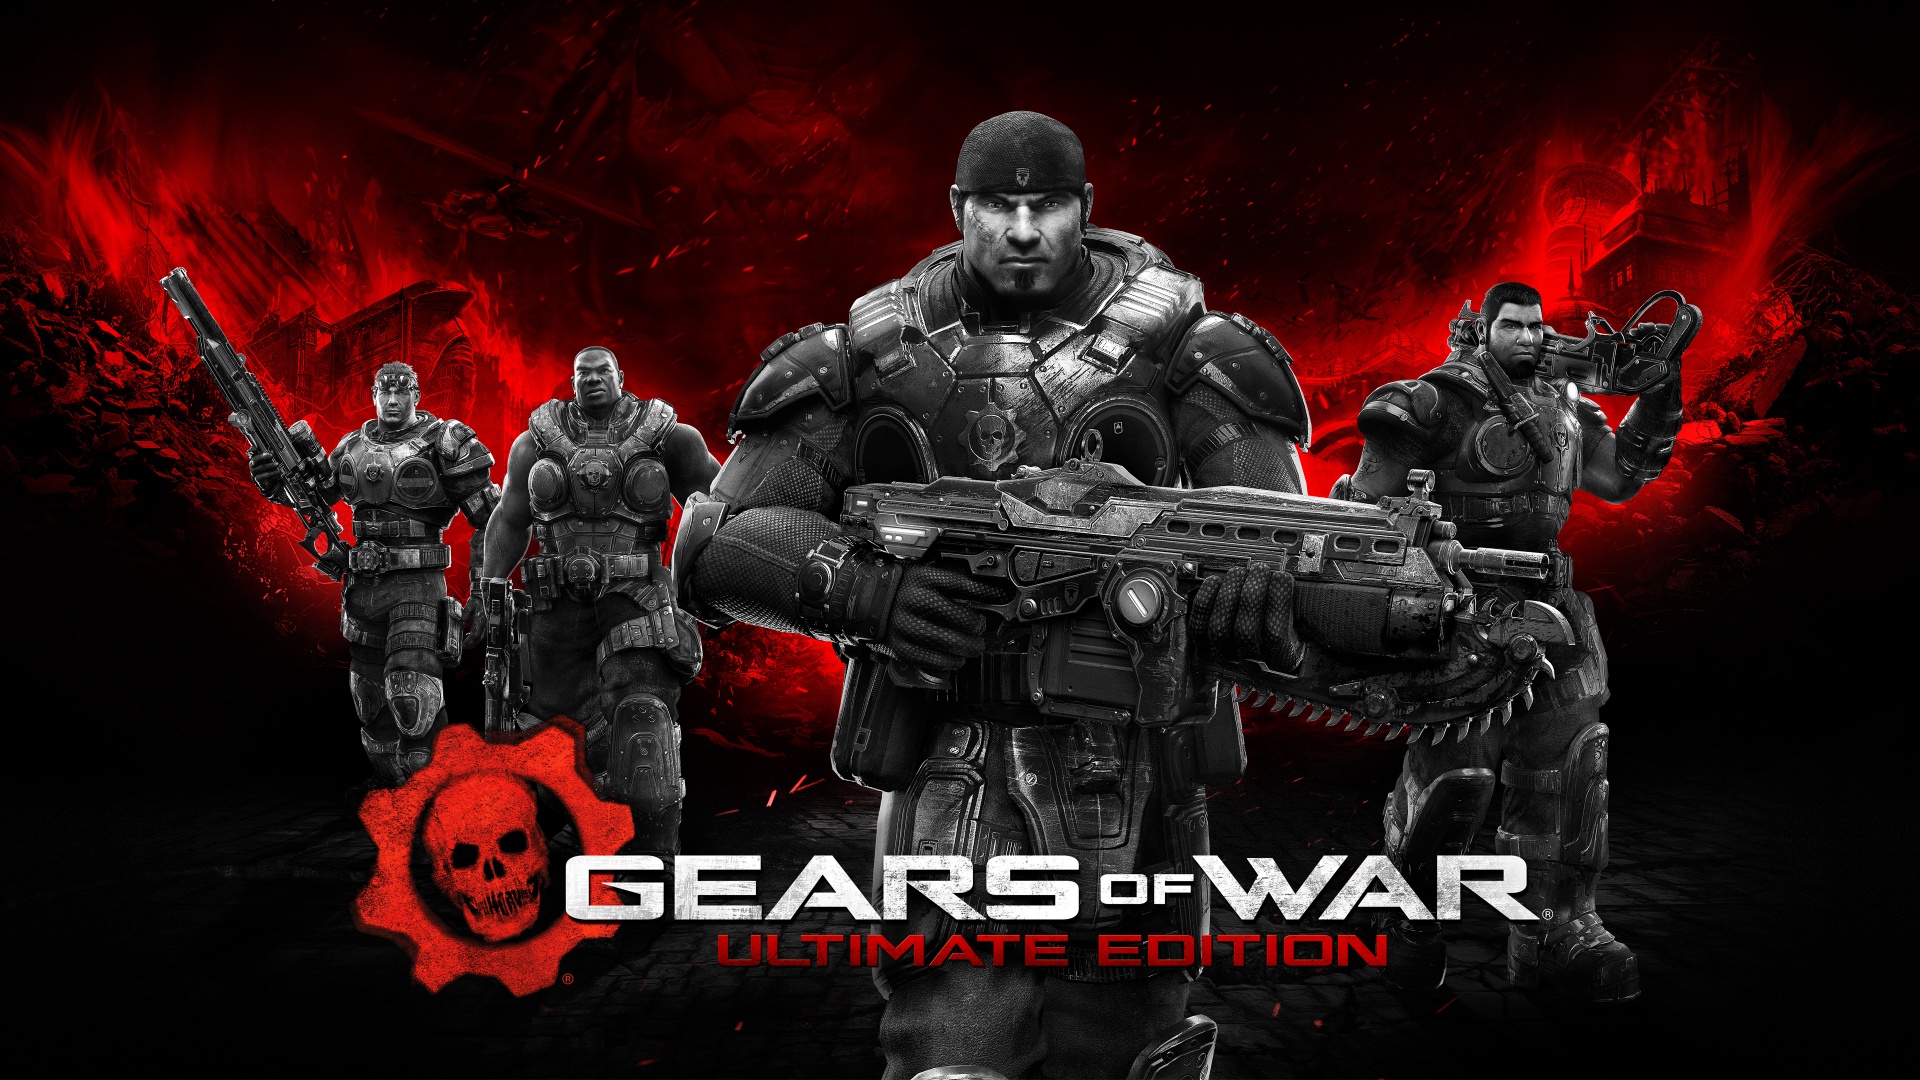 Gears-Of-War-Ultimate-Edition-Game-WallpapersByte-com-1920x1080